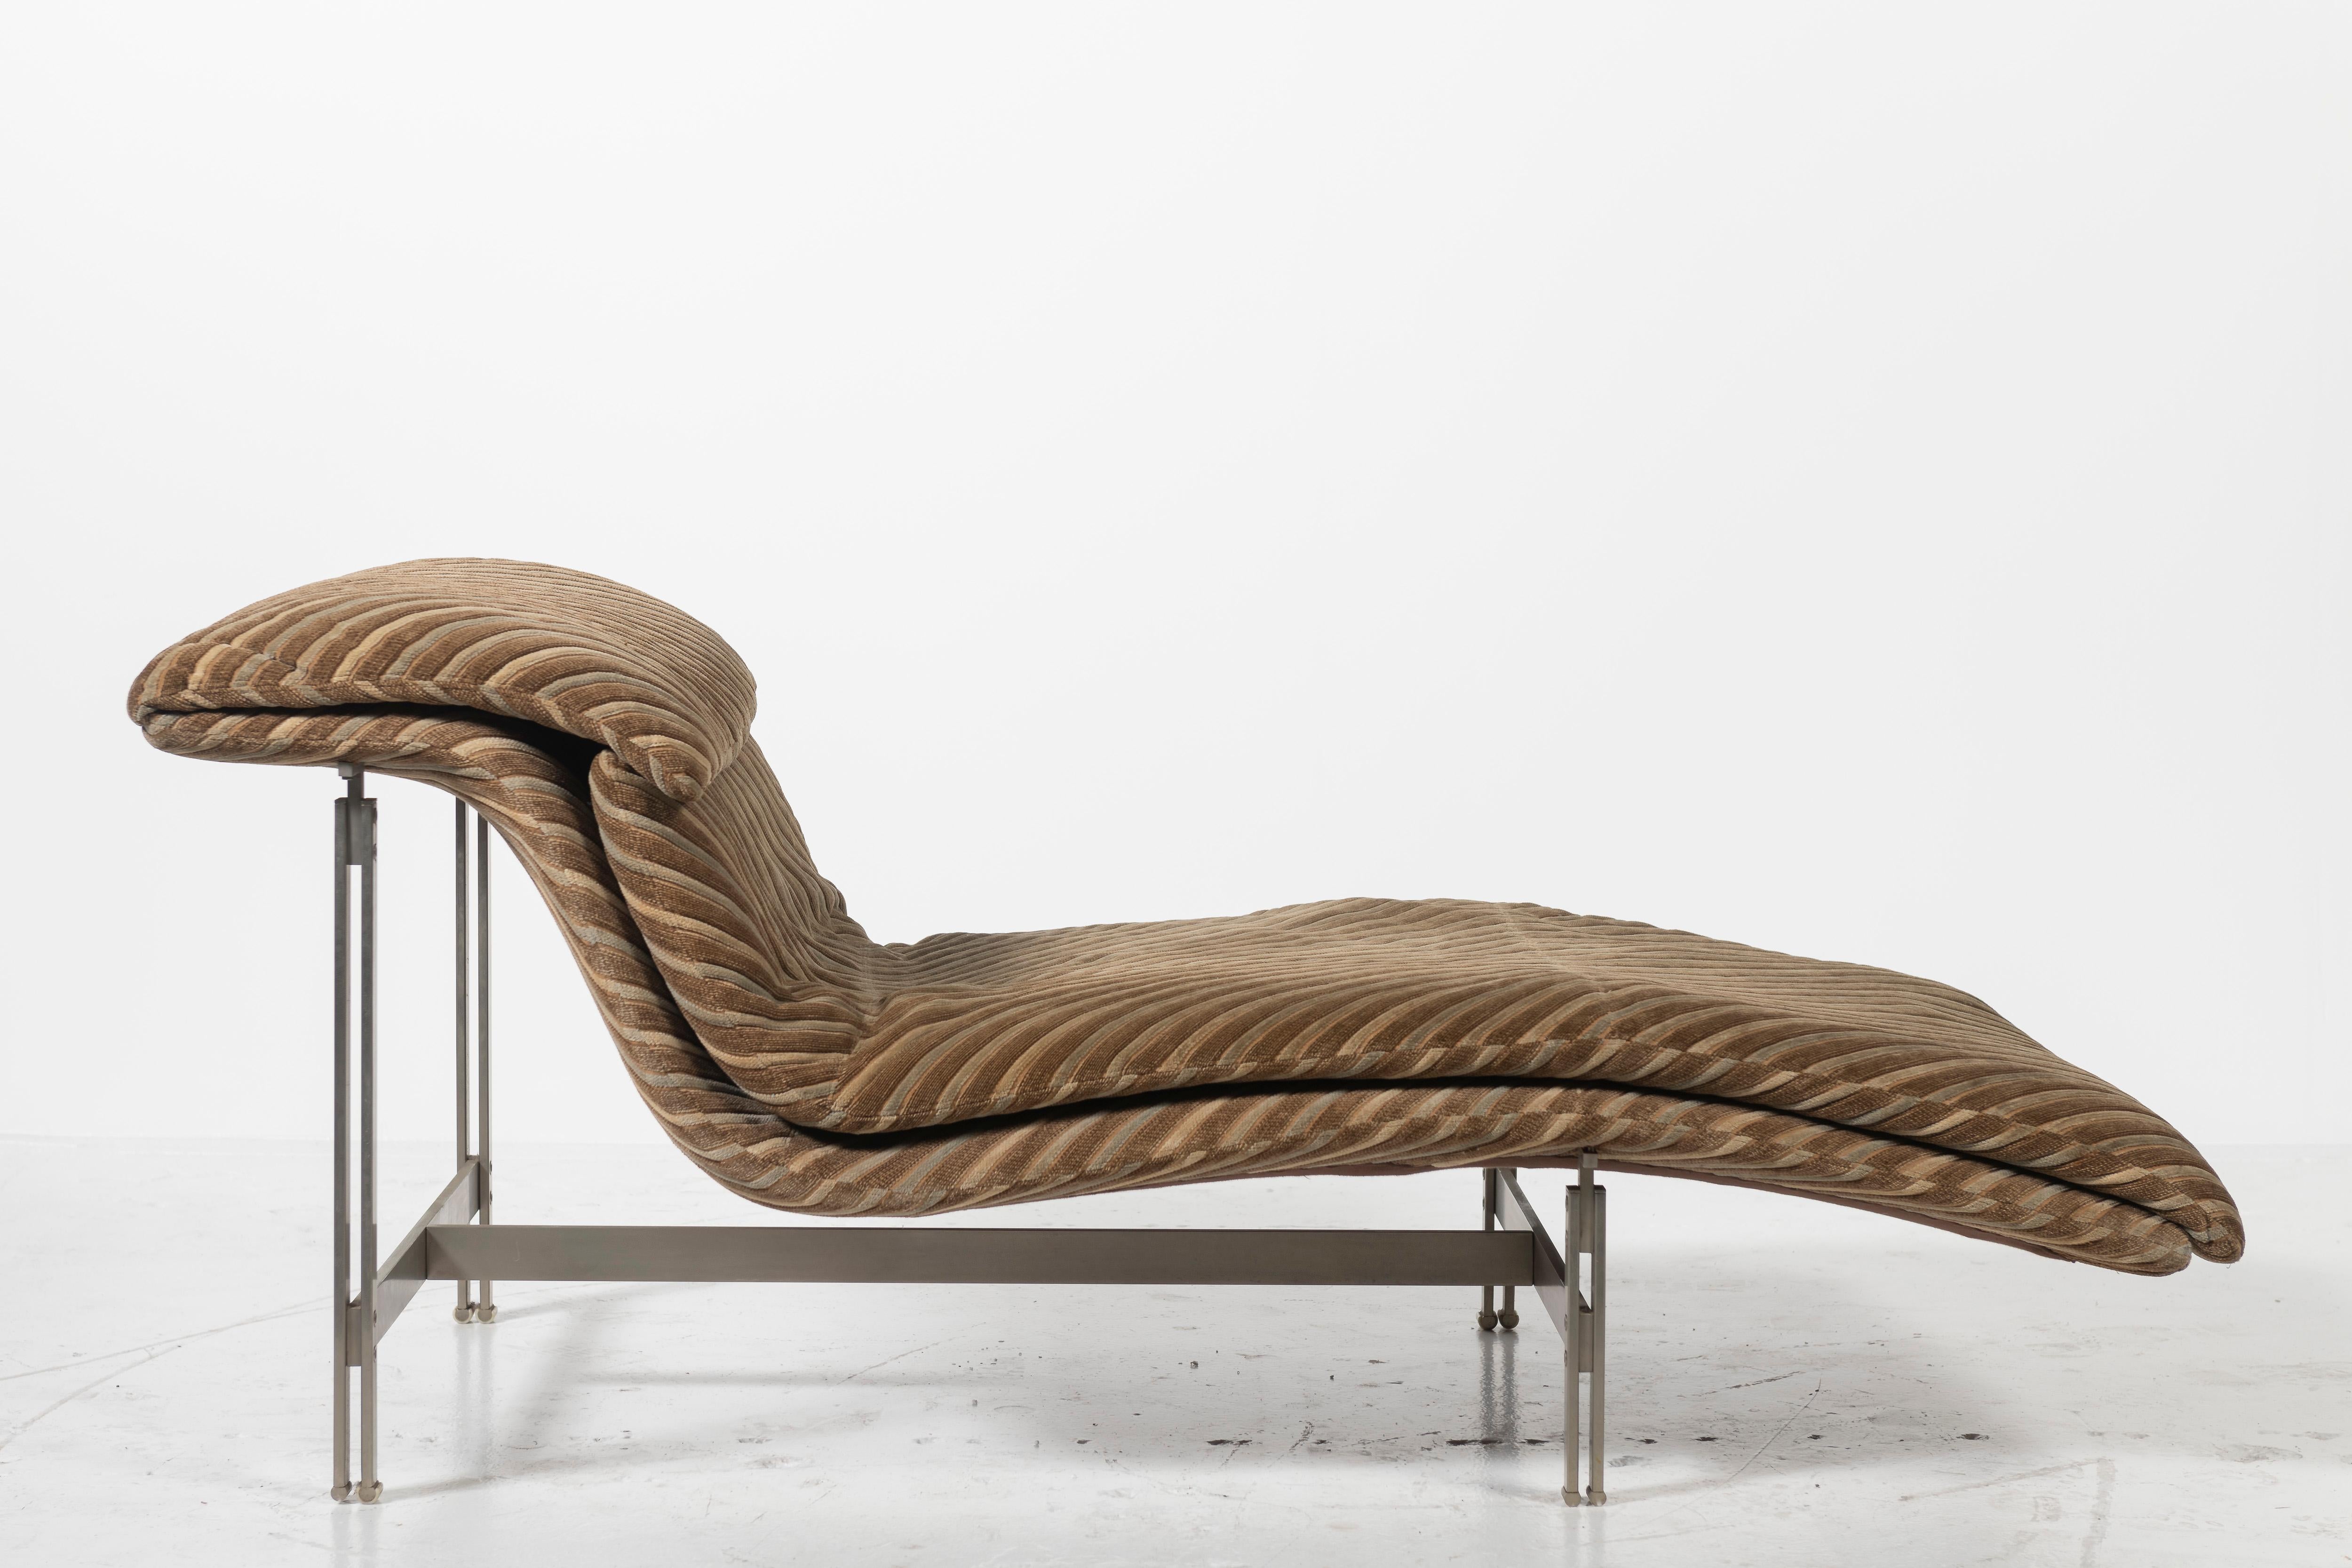 Iconic “Wave” chaise lounge designed by Giovanni Offredi for manufacturer Saporiti Italia. The signature is on the interior. With a steel brushed structure and upholstered cushion, this a a very comfortable seat. The modern shape of the lounge is